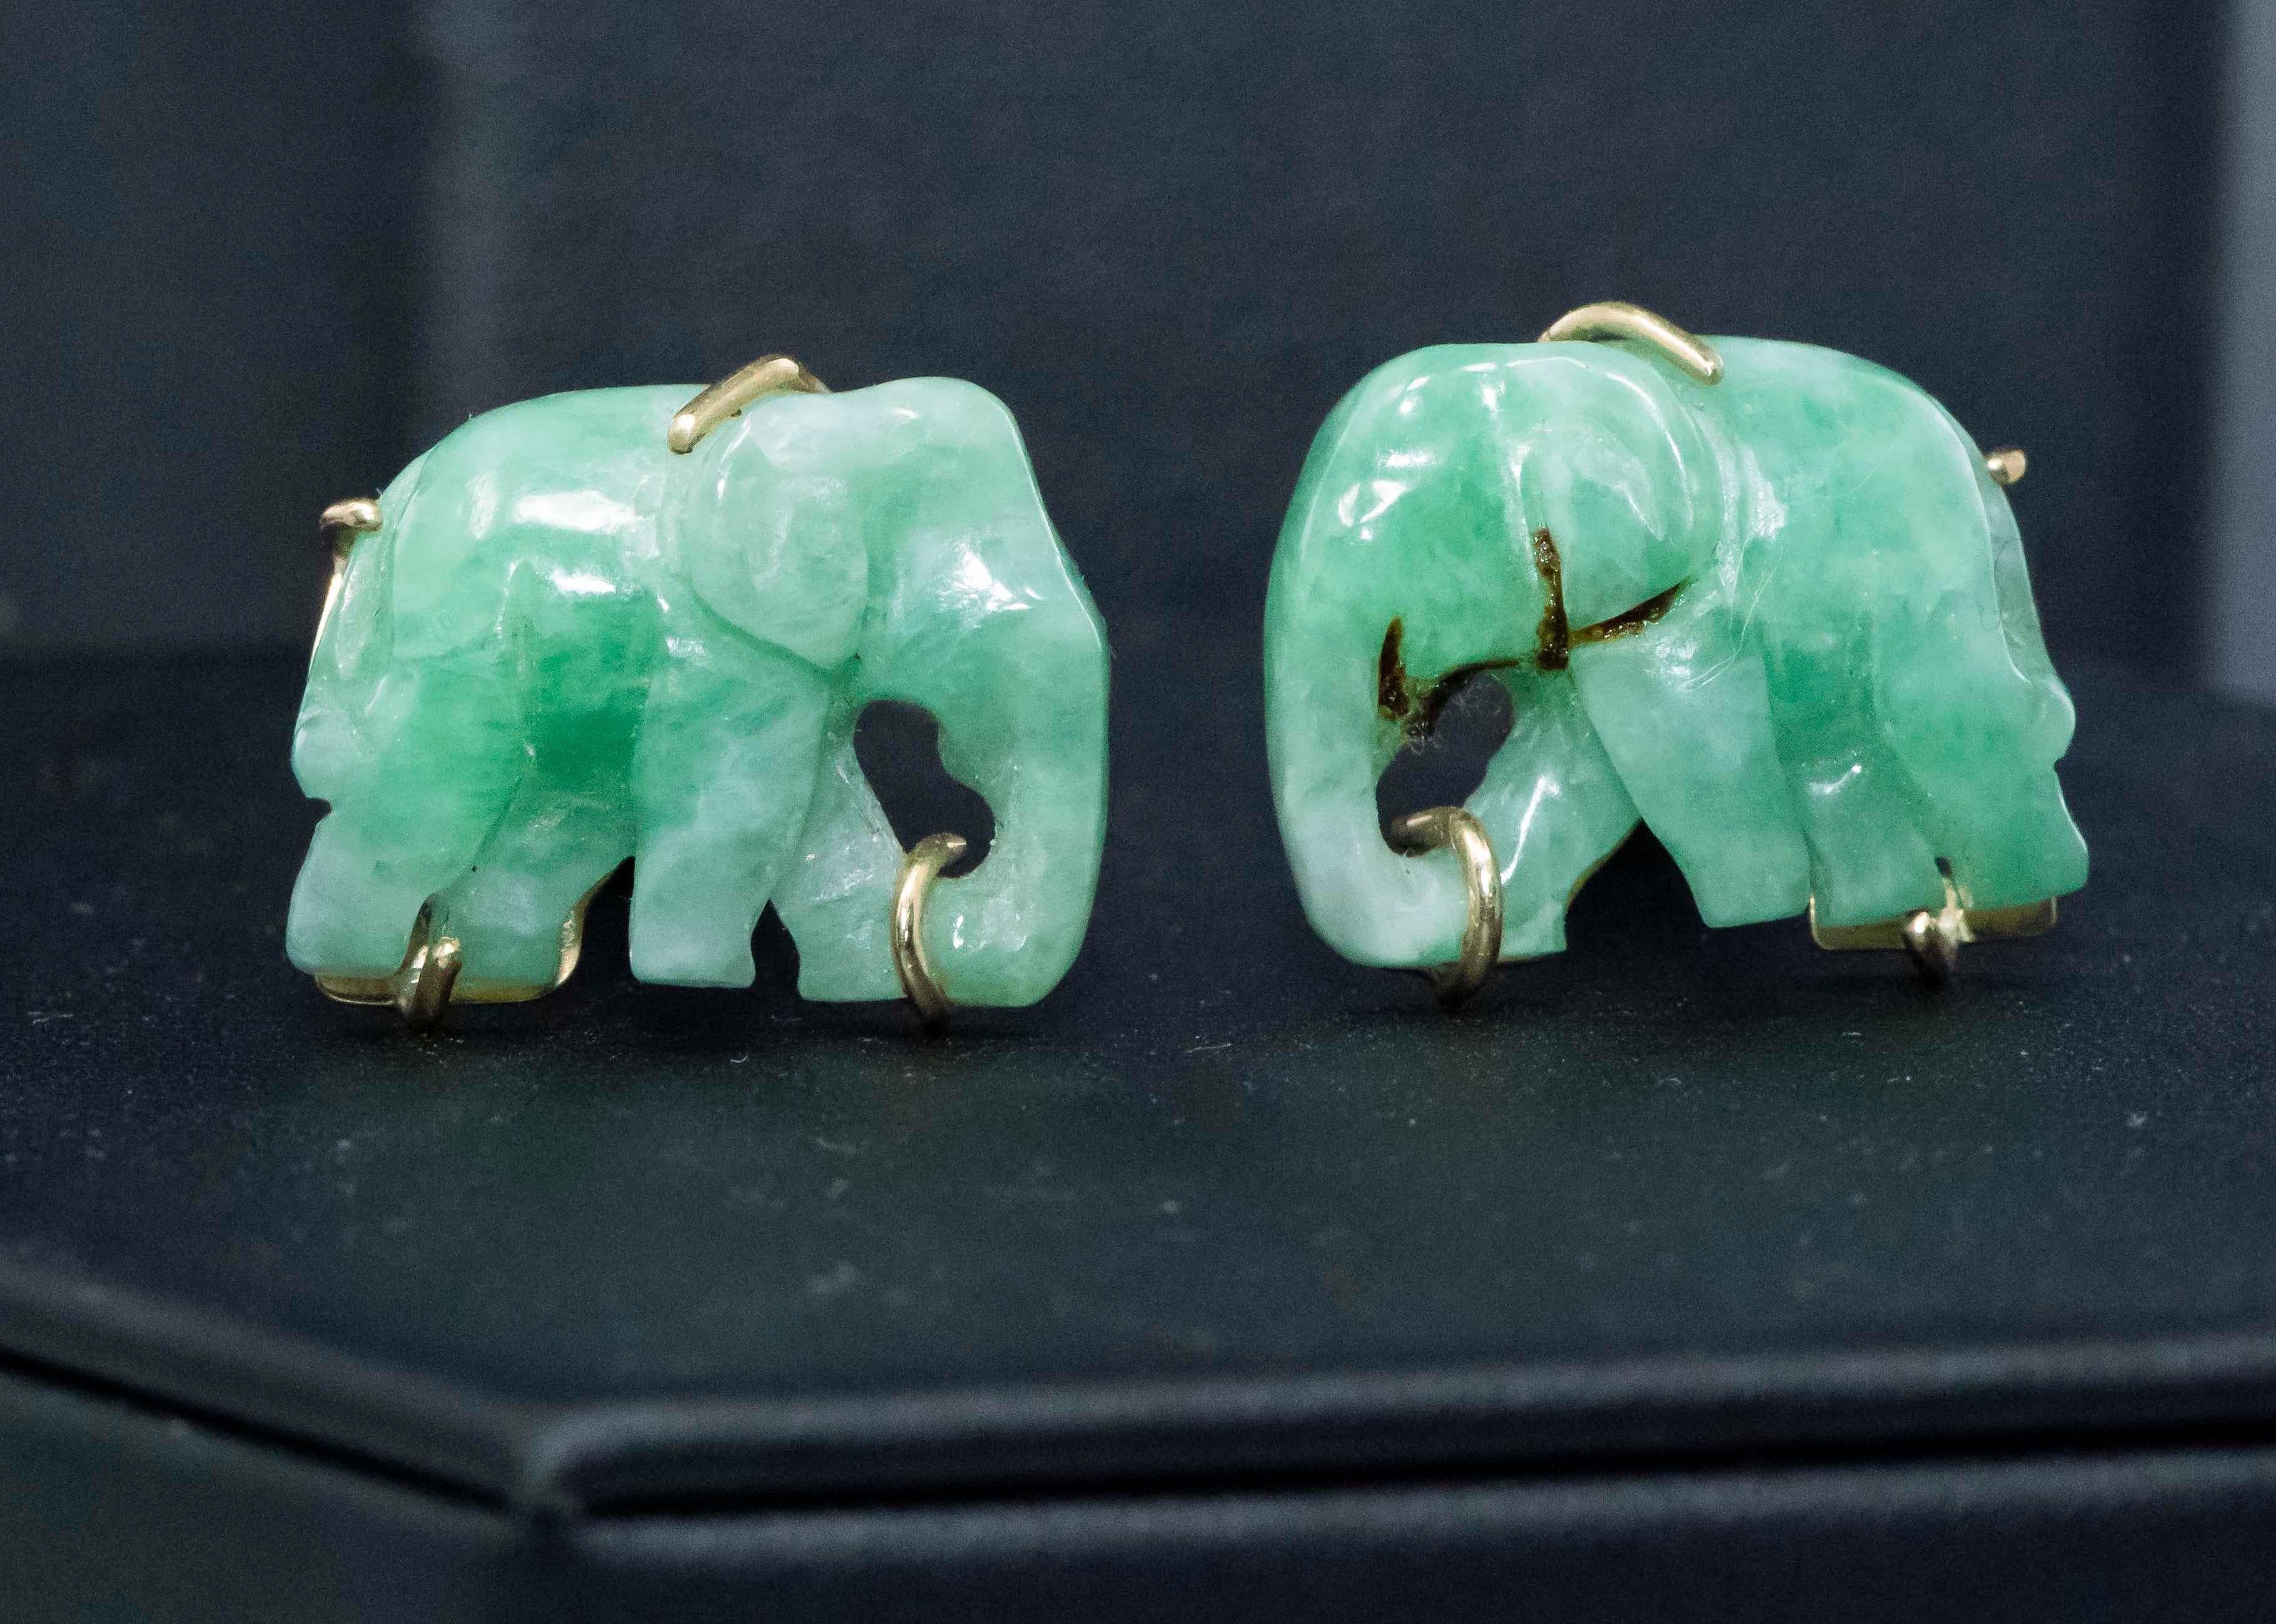 The present cufflinks are green jade elephant shaped cufflinks exhibiting good color throughout approximately 20mm wide tail to trunk by 15mm in height and are set in 14kt yellow gold mount with a depth of 32mm, circa 1960s. Additionally, they are